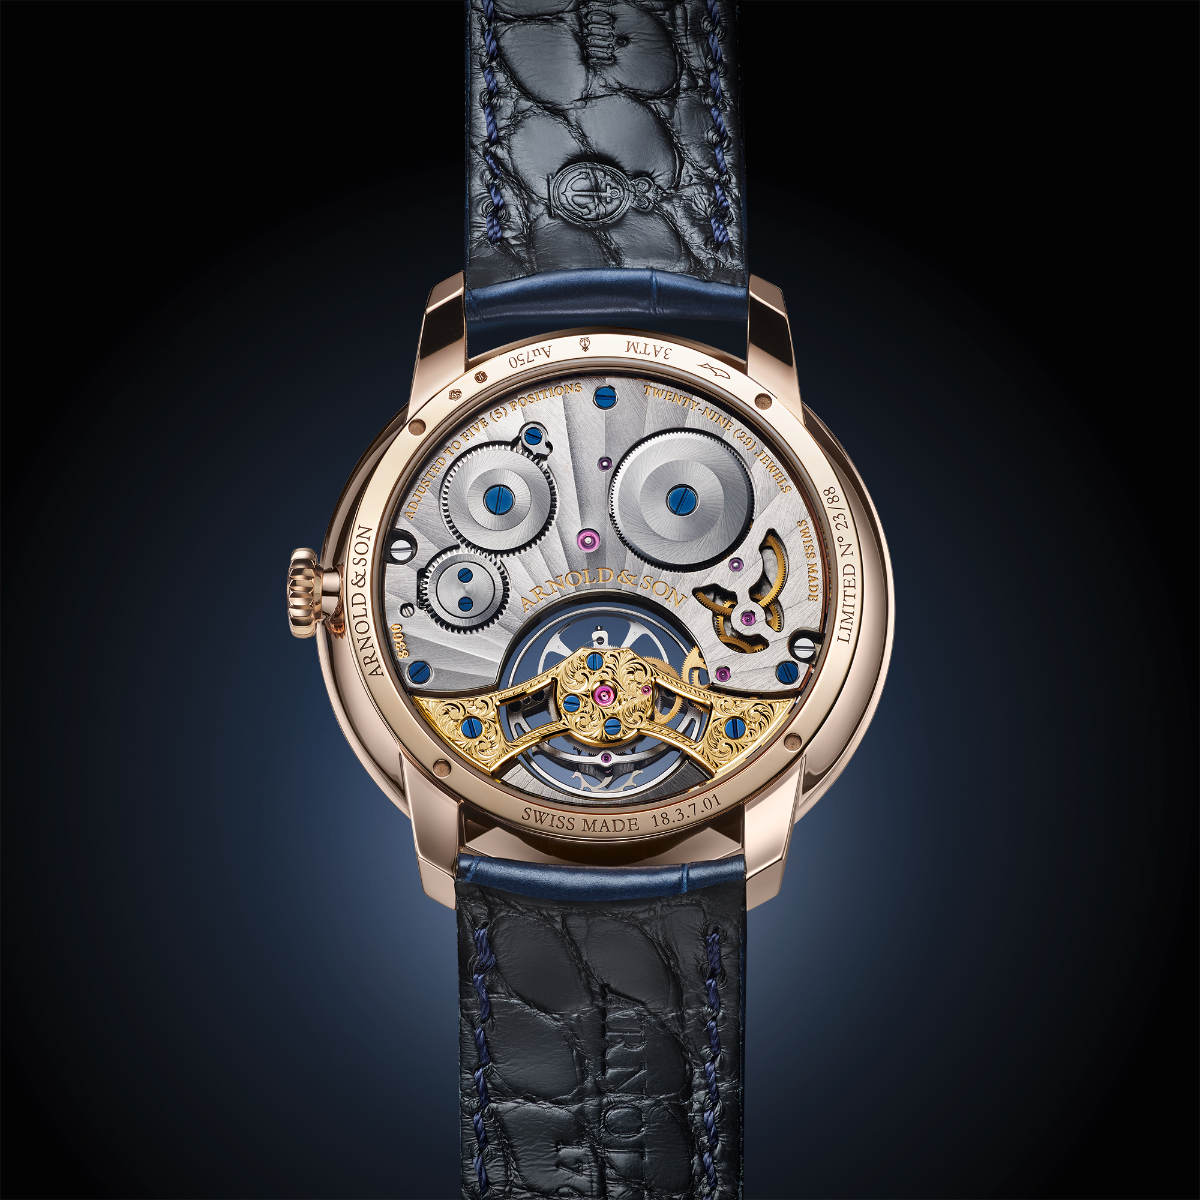 Arnold & Son Presents Its New Ultrathin Tourbillon Gold Watch - The Finesse Of Gold And Silver